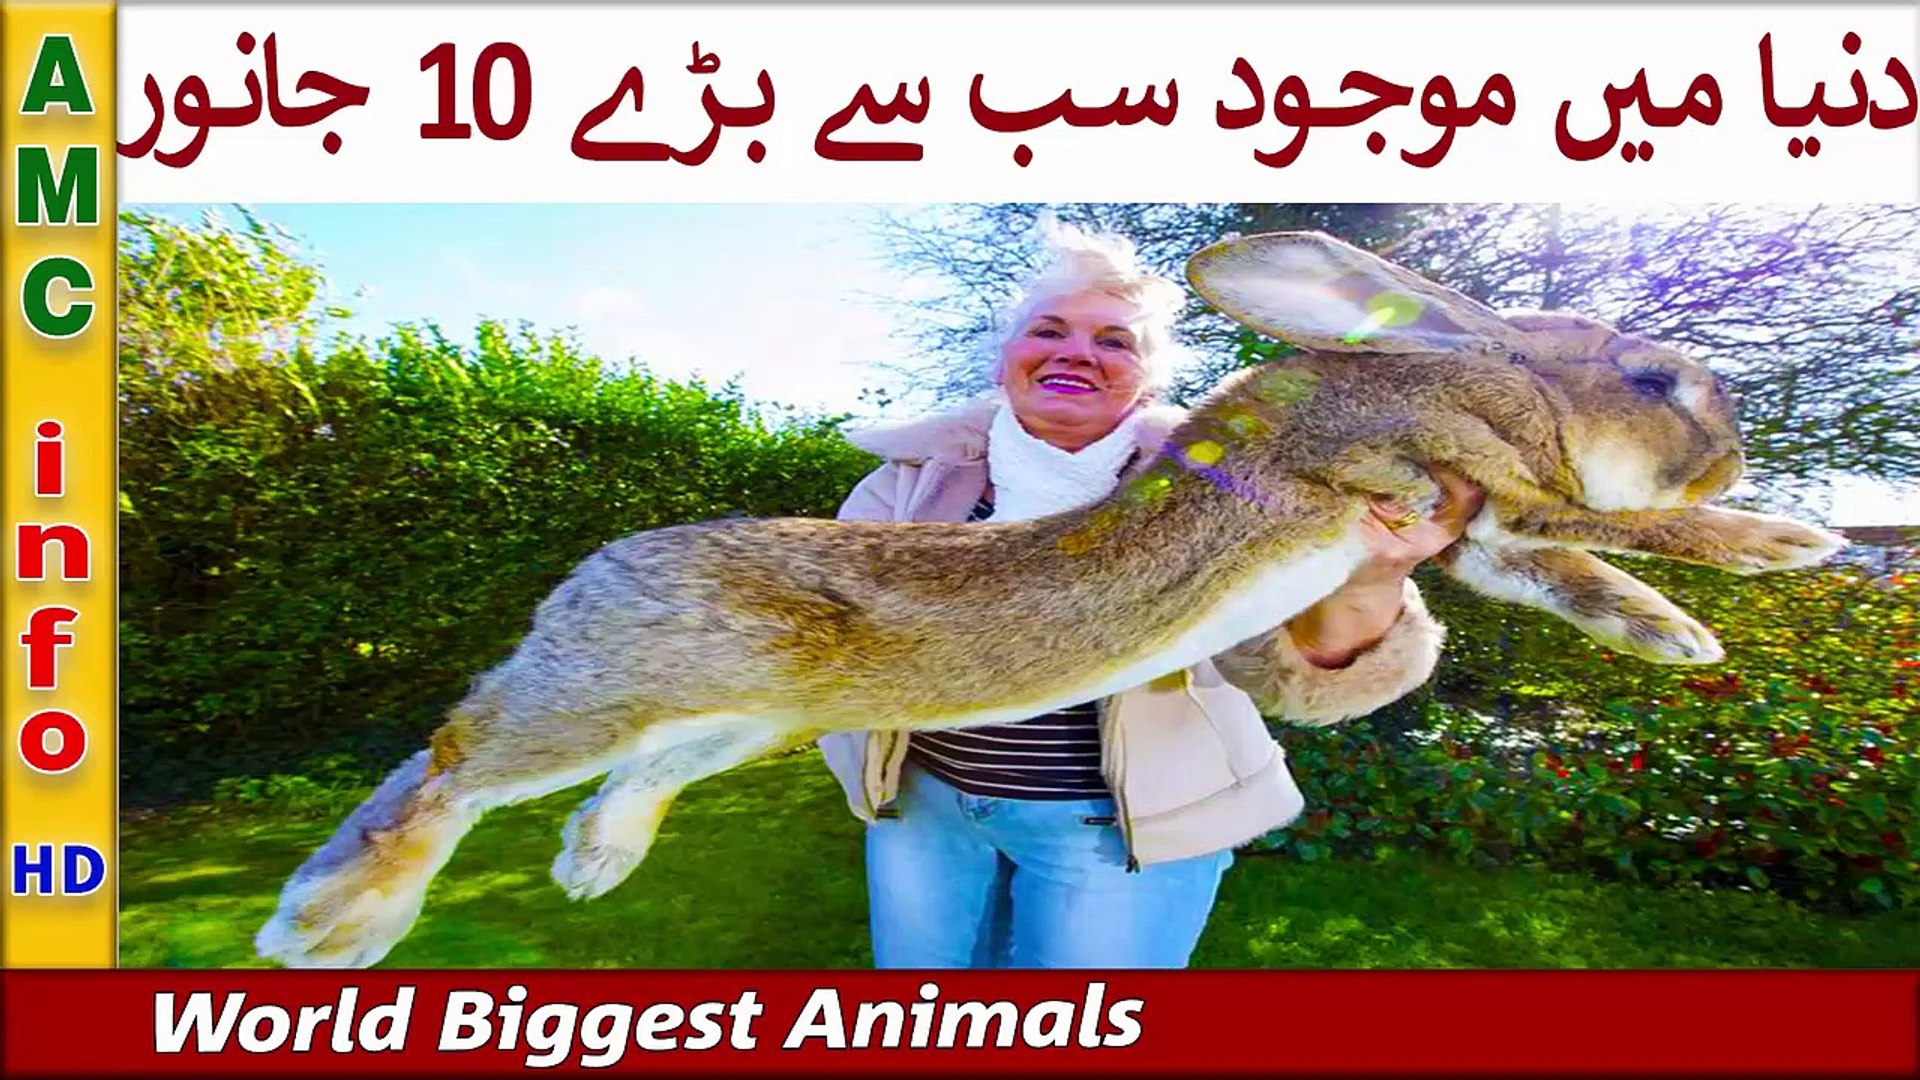 19 Top 10 Biggest and Largest Animals In The World - video Dailymotion